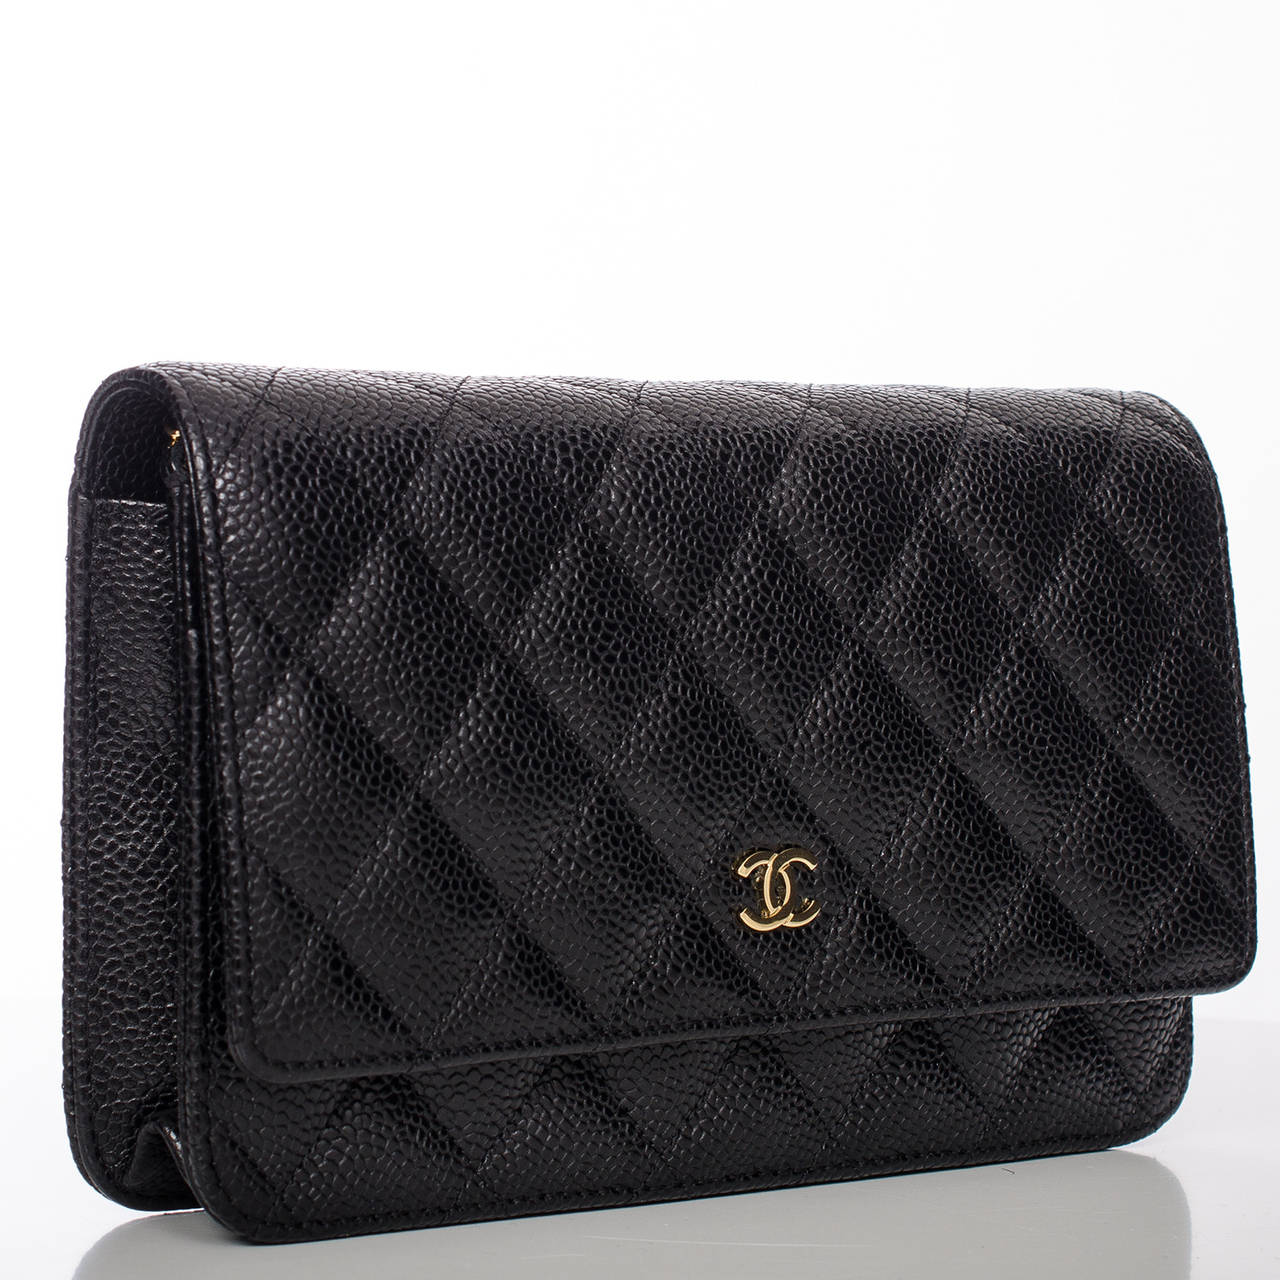 Chanel black Classic Quilted Wallet On Chain (WOC) of quilted caviar with gold tone hardware.

The Wallet On Chain (WOC) is one of the most desired Chanel accessory. Its great styling, versatility and attractive price point makes it a must for new